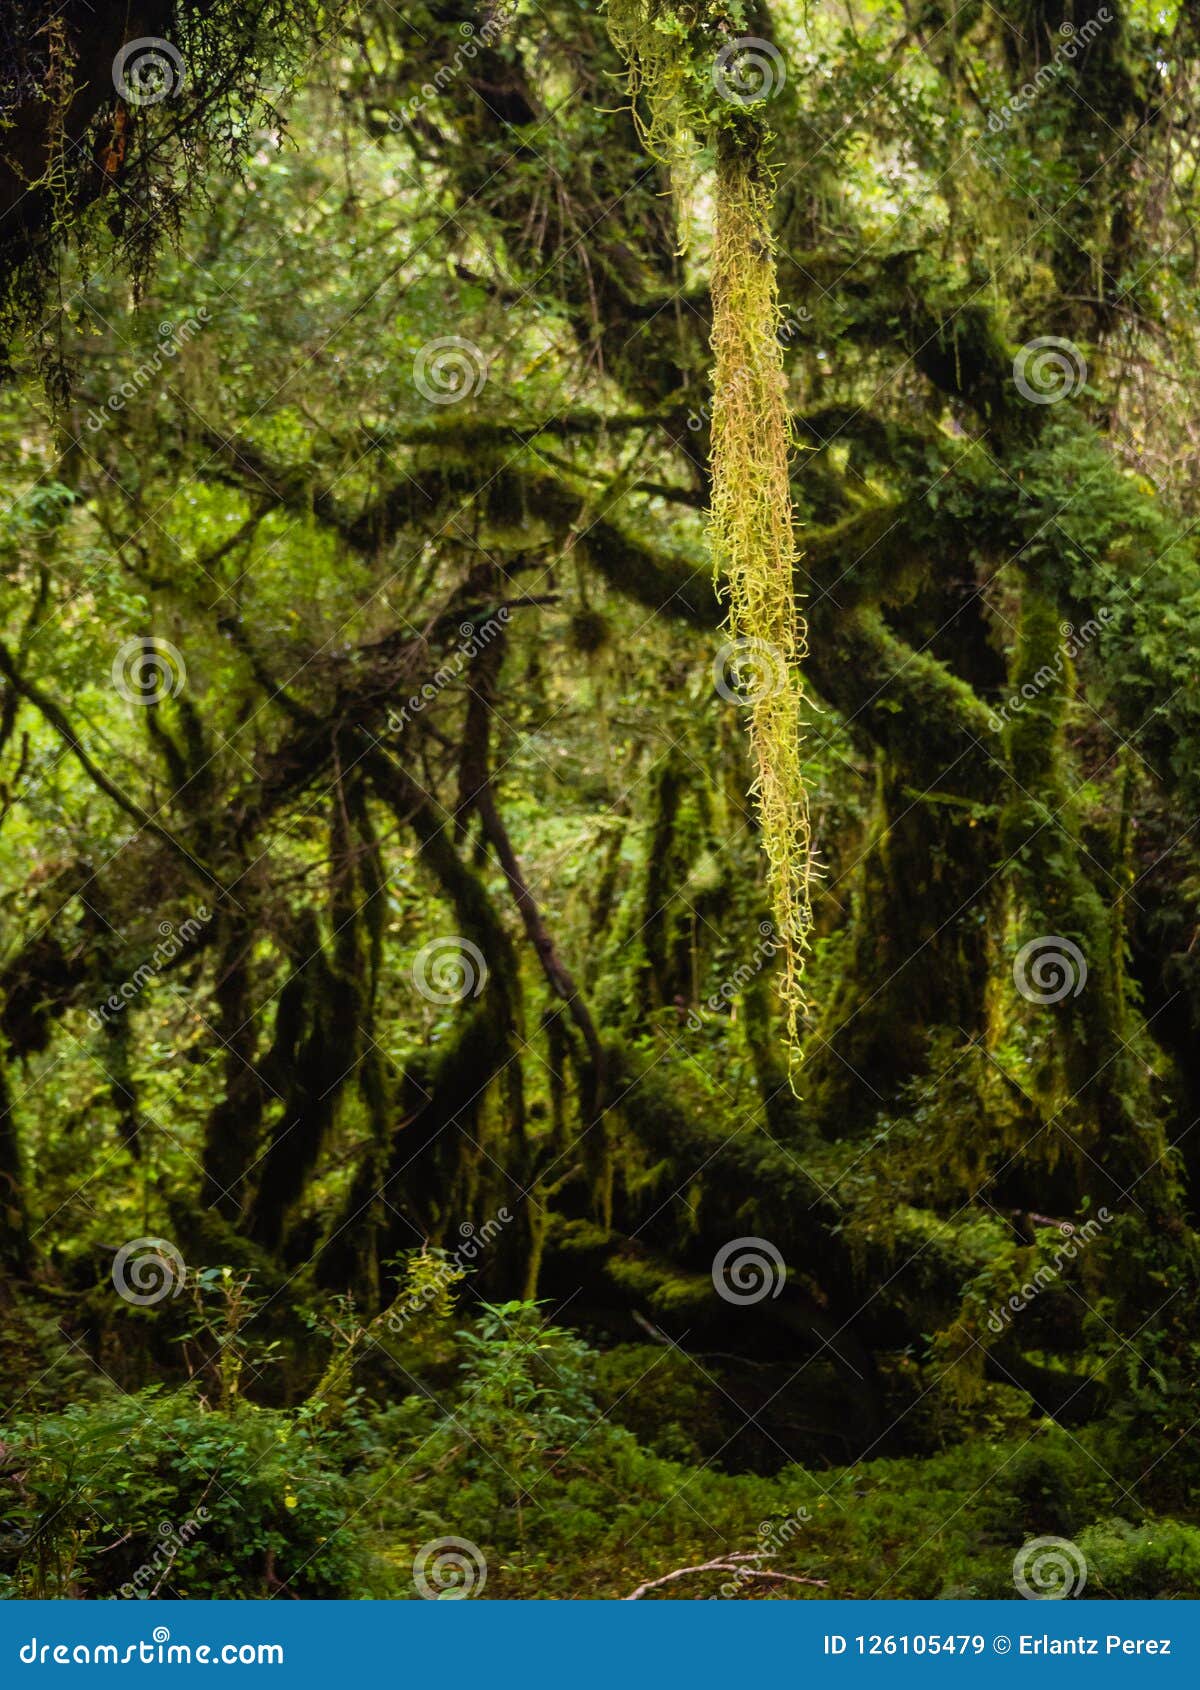 detail of the enchanted forest in carretera austral, bosque encantado chile